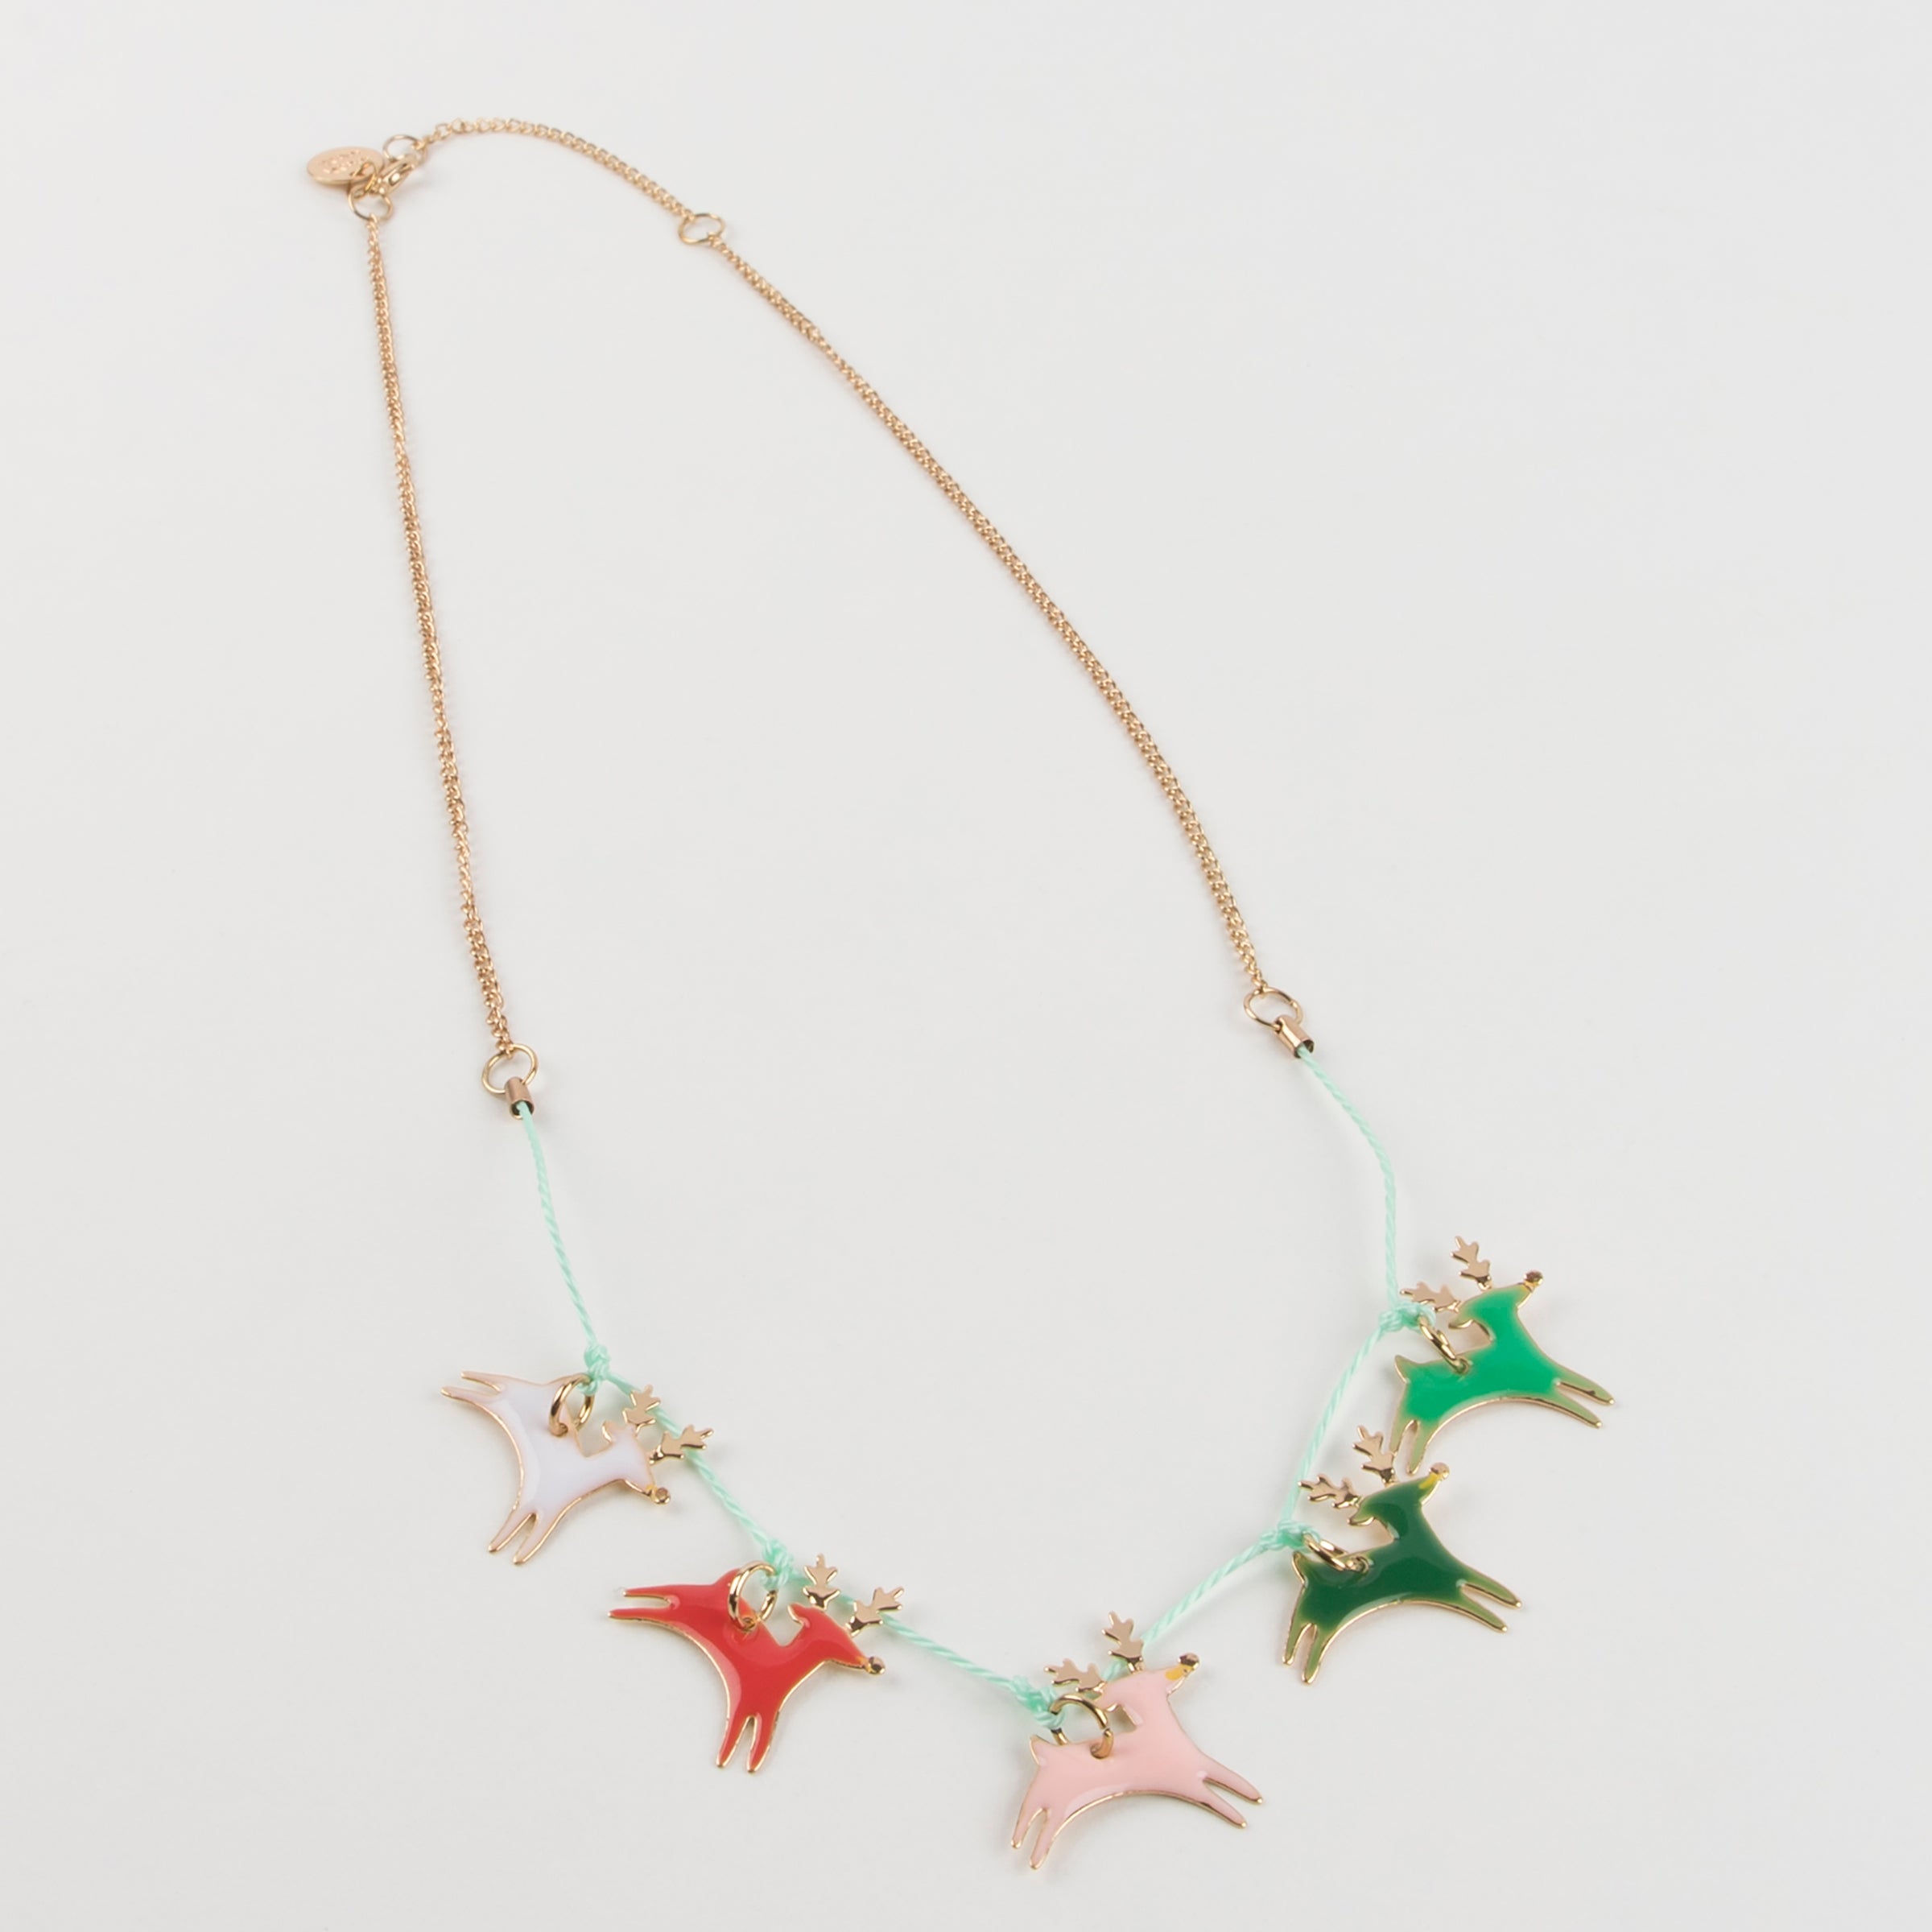 This Christmas necklace, crafted with enamel reindeers, is a wonderful kids stocking filler.